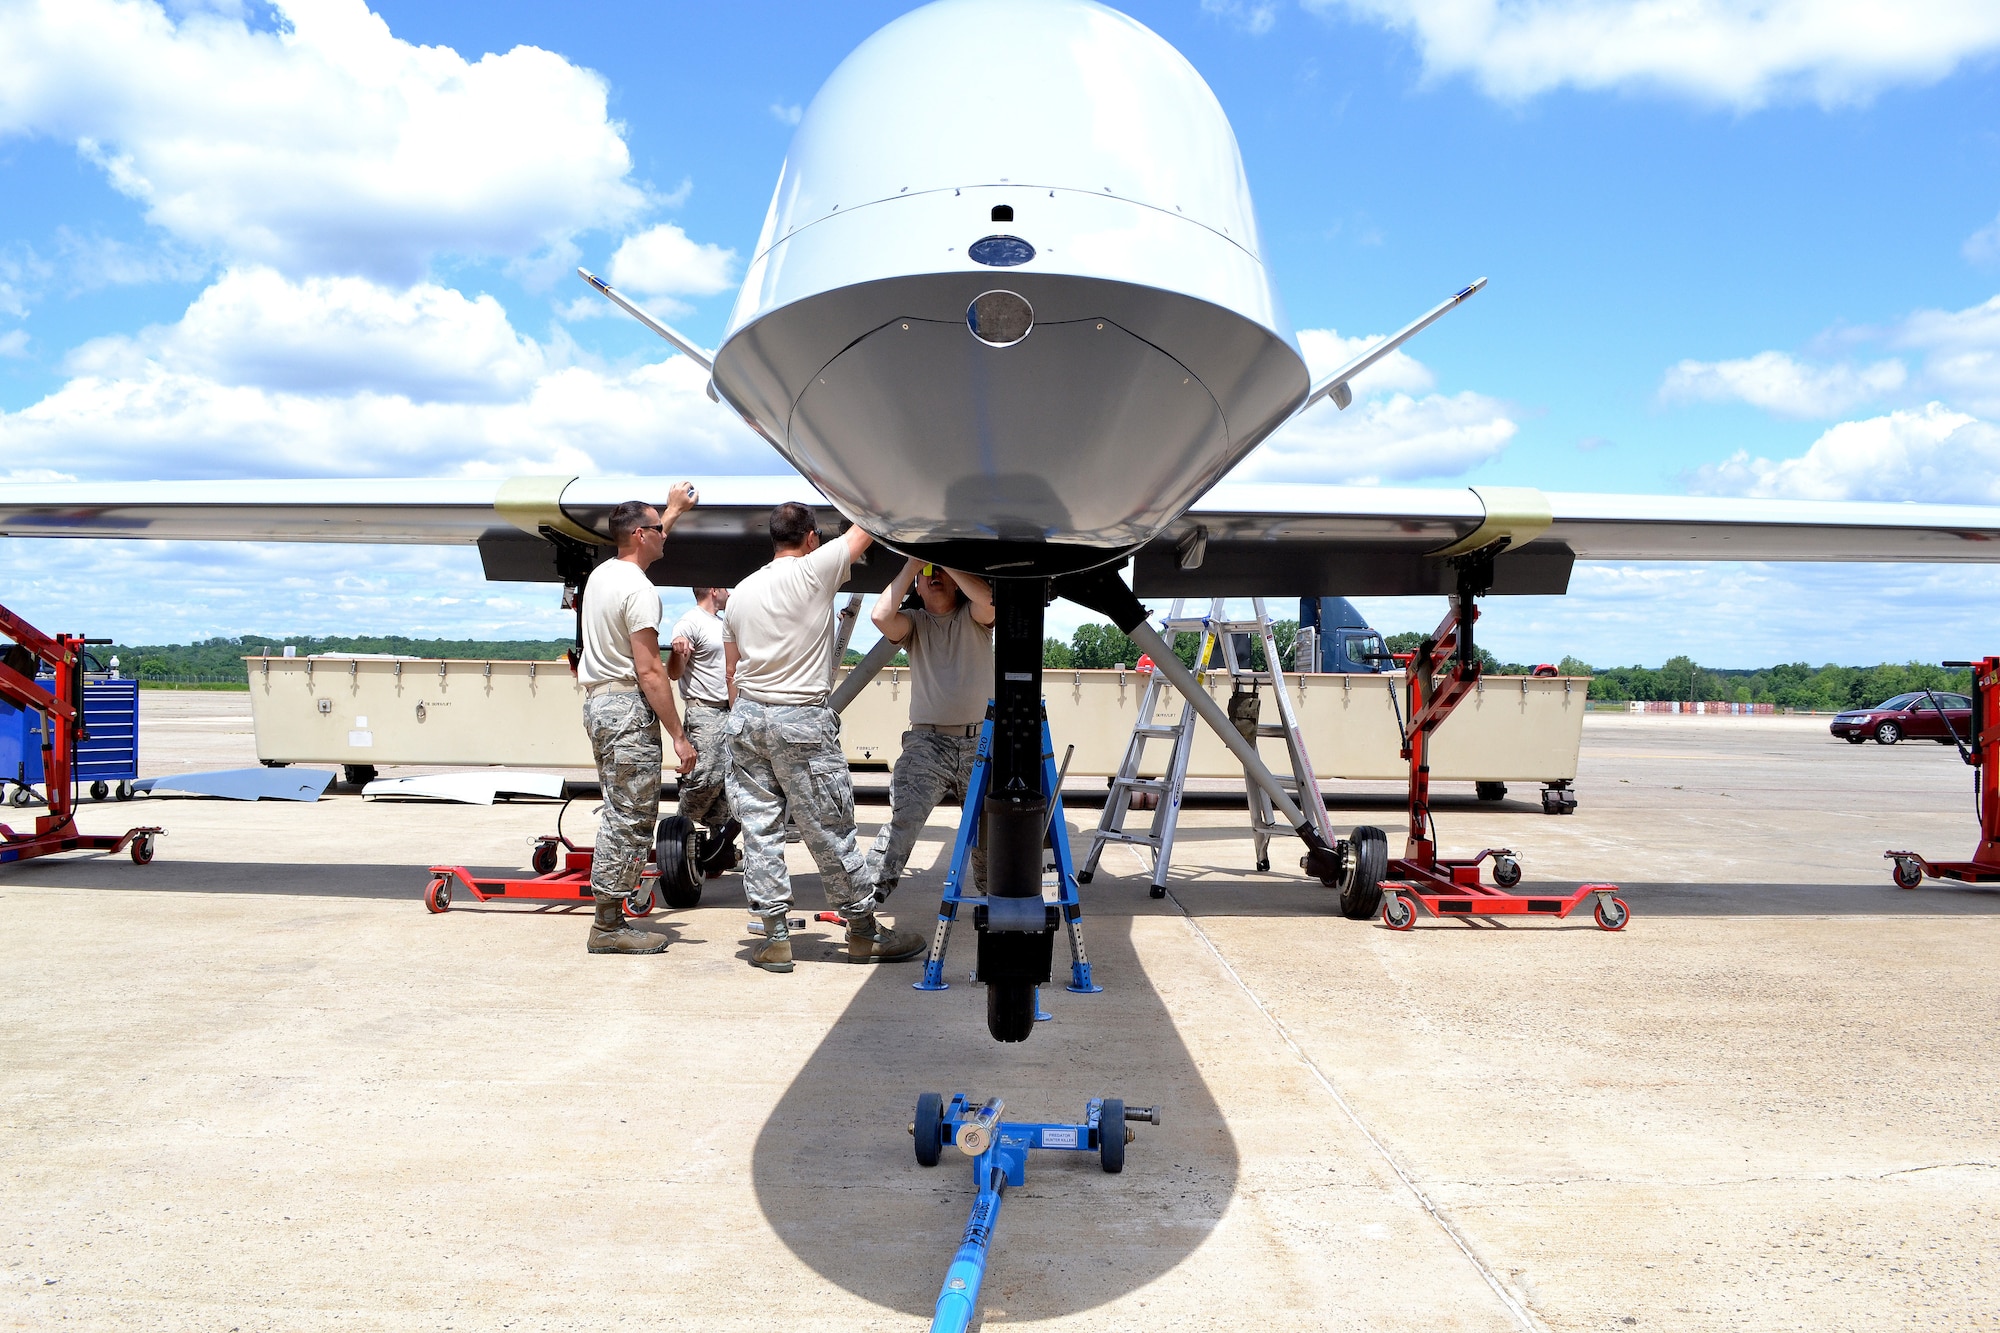 An aircraft maintenance team from the 174th Attack Wing out of Syracuse, N.Y., assemble a static display General Atomics MQ-9 Reaper on June 6, 2014 at Horsham Air Guard Station.